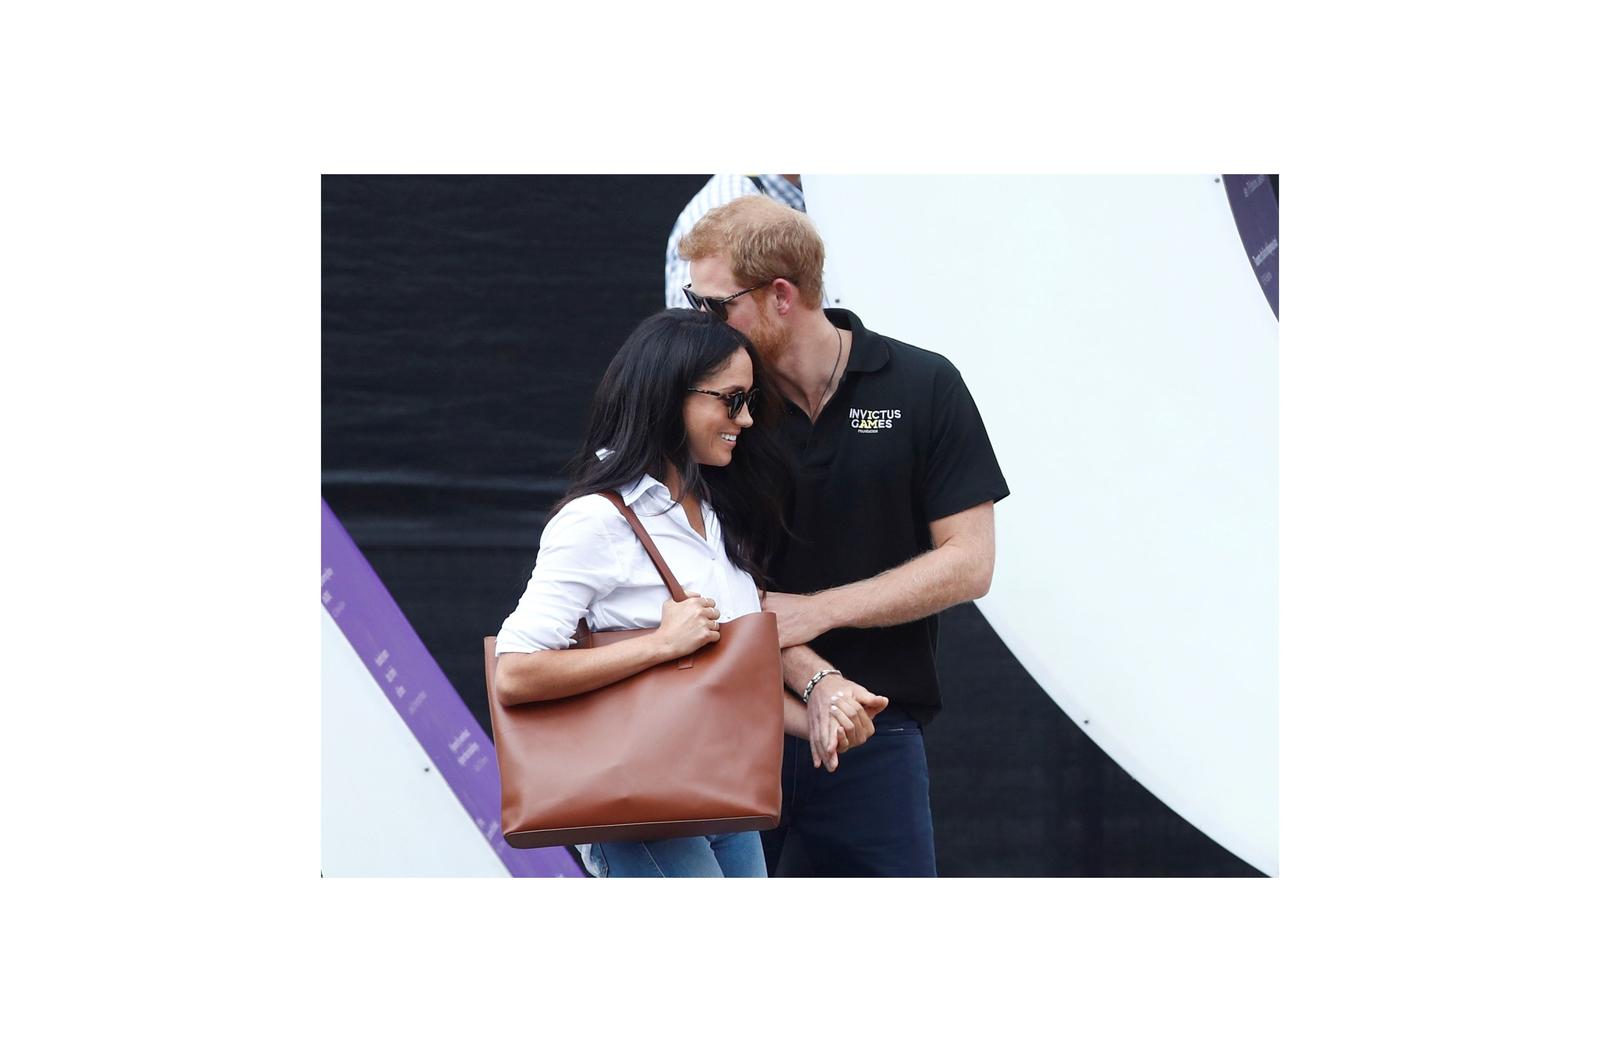 Britain’s Prince Harry arrives with girlfriend actress Markle at the wheelchair tennis event during the Invictus Games in Toronto